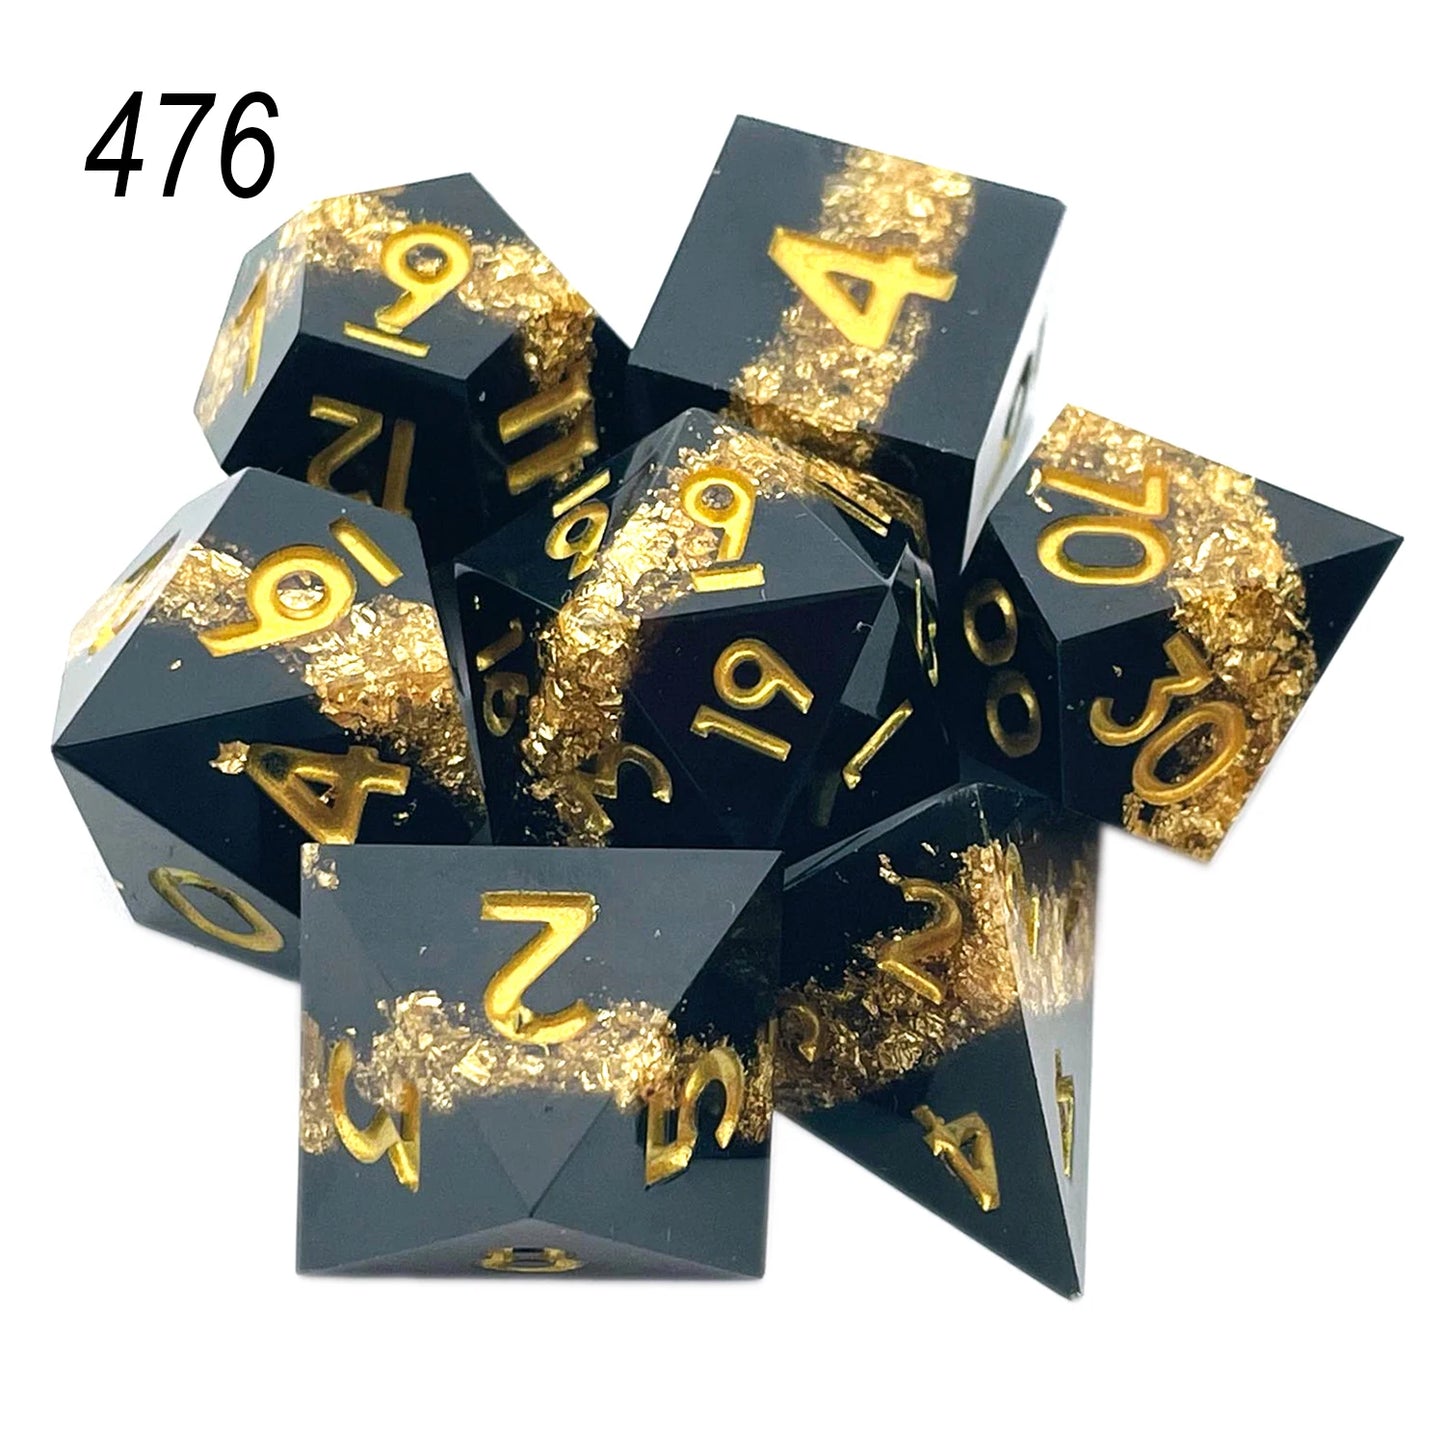 2023 Resin Dice 7PCs Dnd Set Solid Polyhedral D&D Dice DND For Role Playing Rpg Rol Pathfinder Board Game Dragon Scale Gifts 476